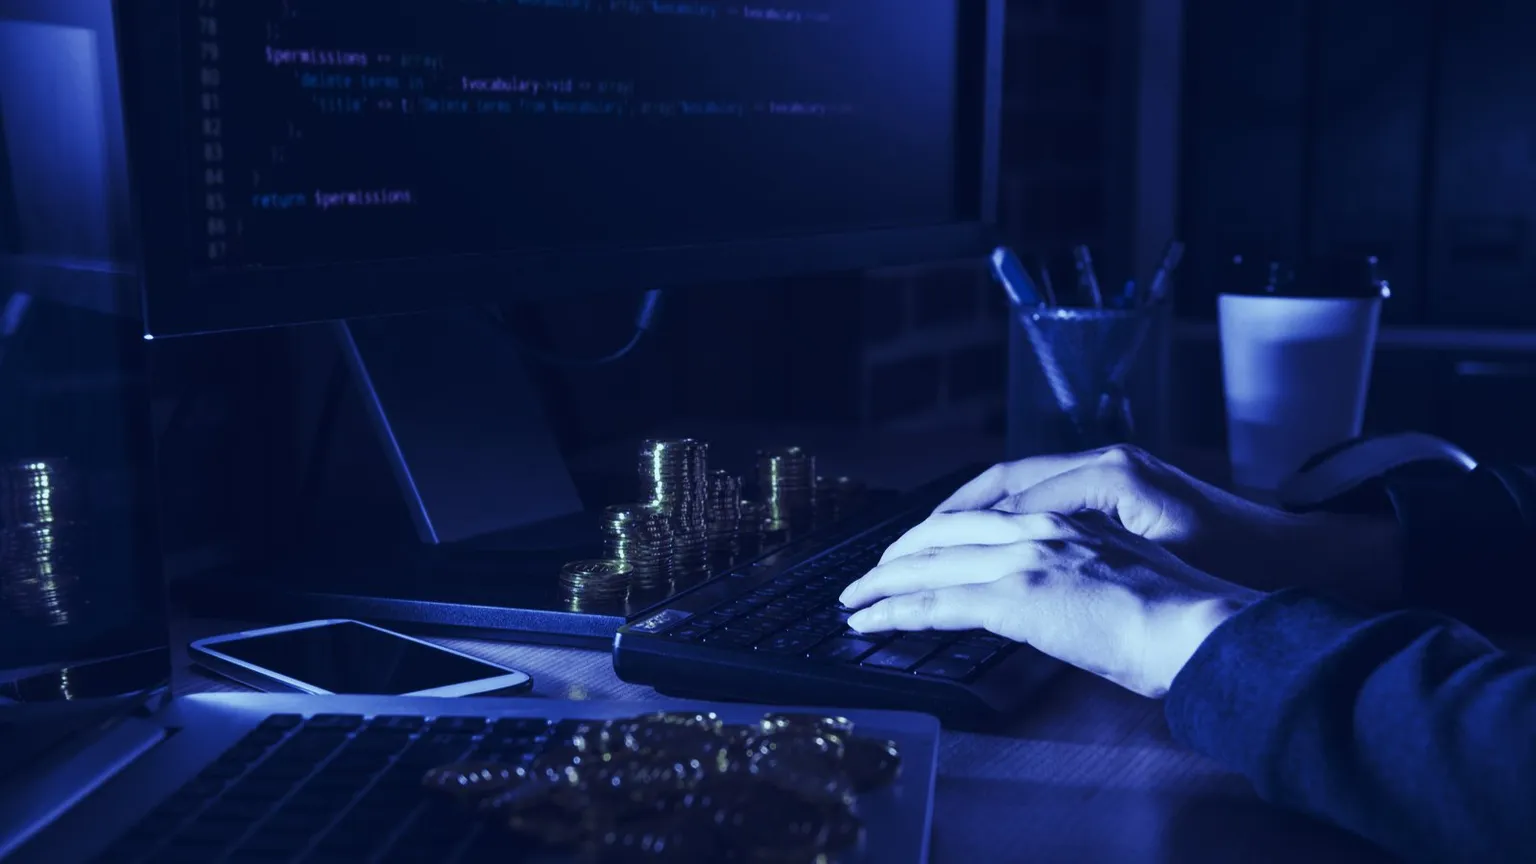 Hackers continue to target the RubyGems libraries with malware that developers could accidentally install. Image: Shutterstock